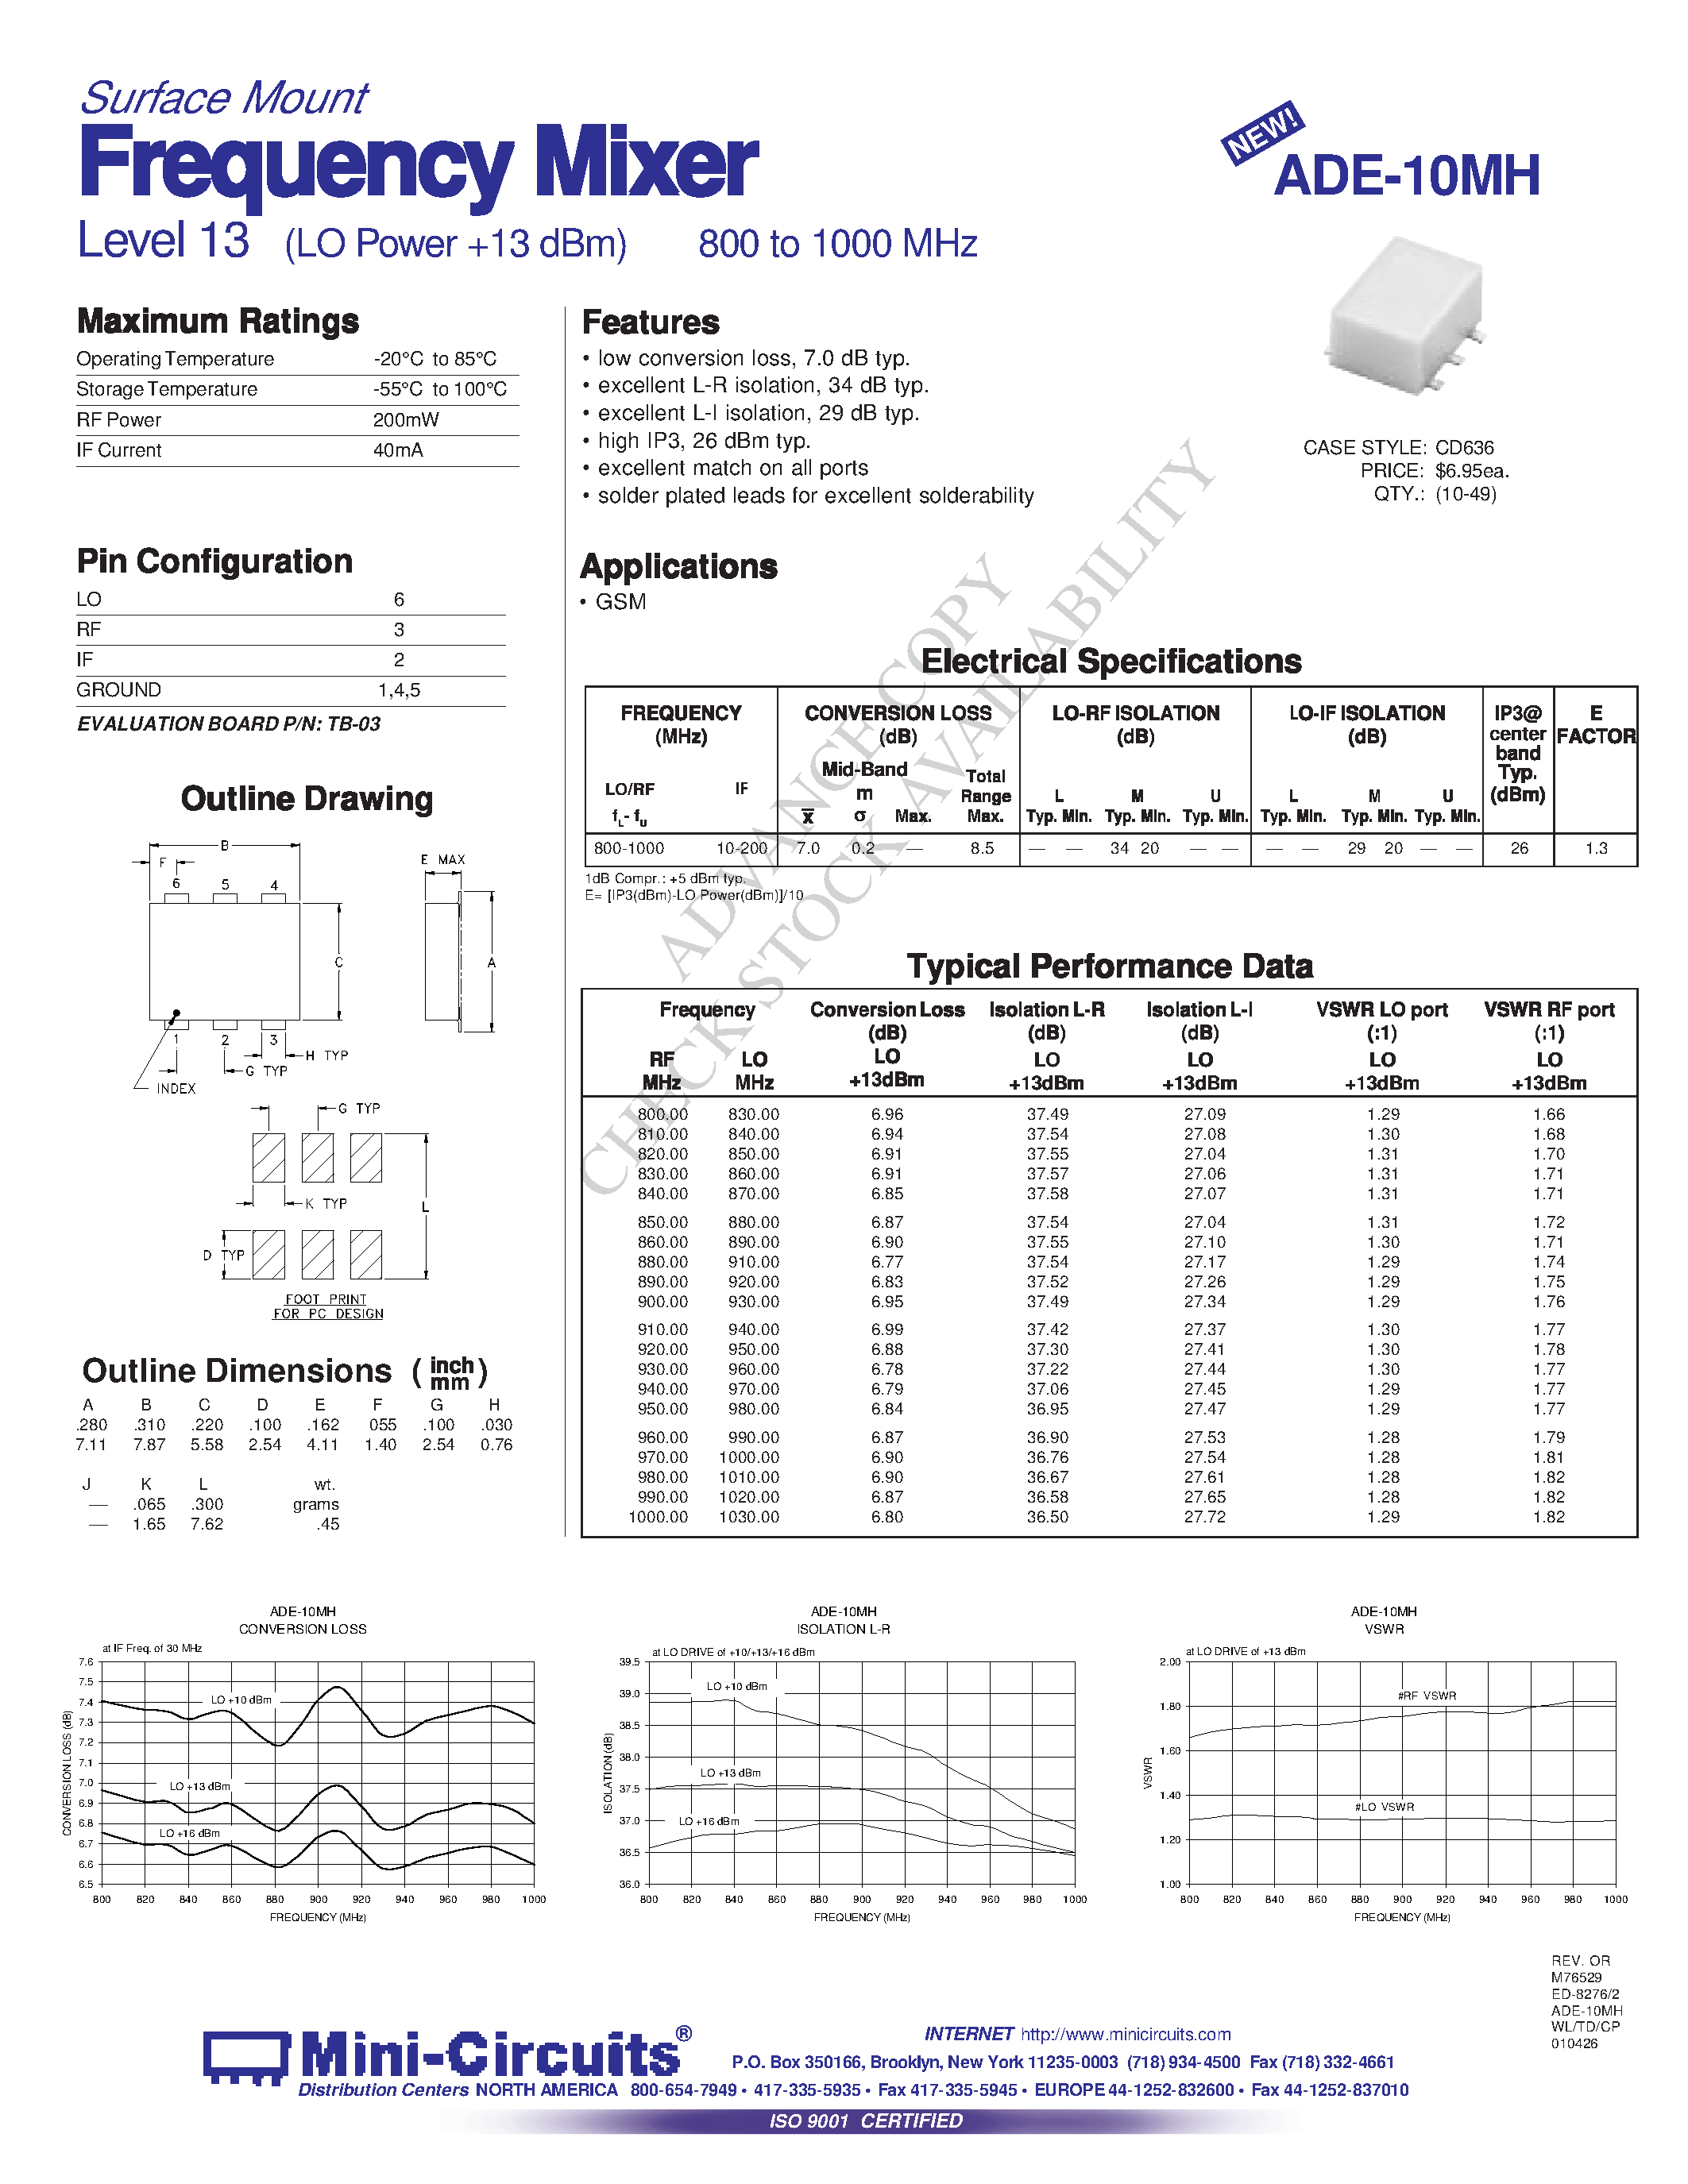 Datasheet ADE-10MH - Frequency Mixer page 1